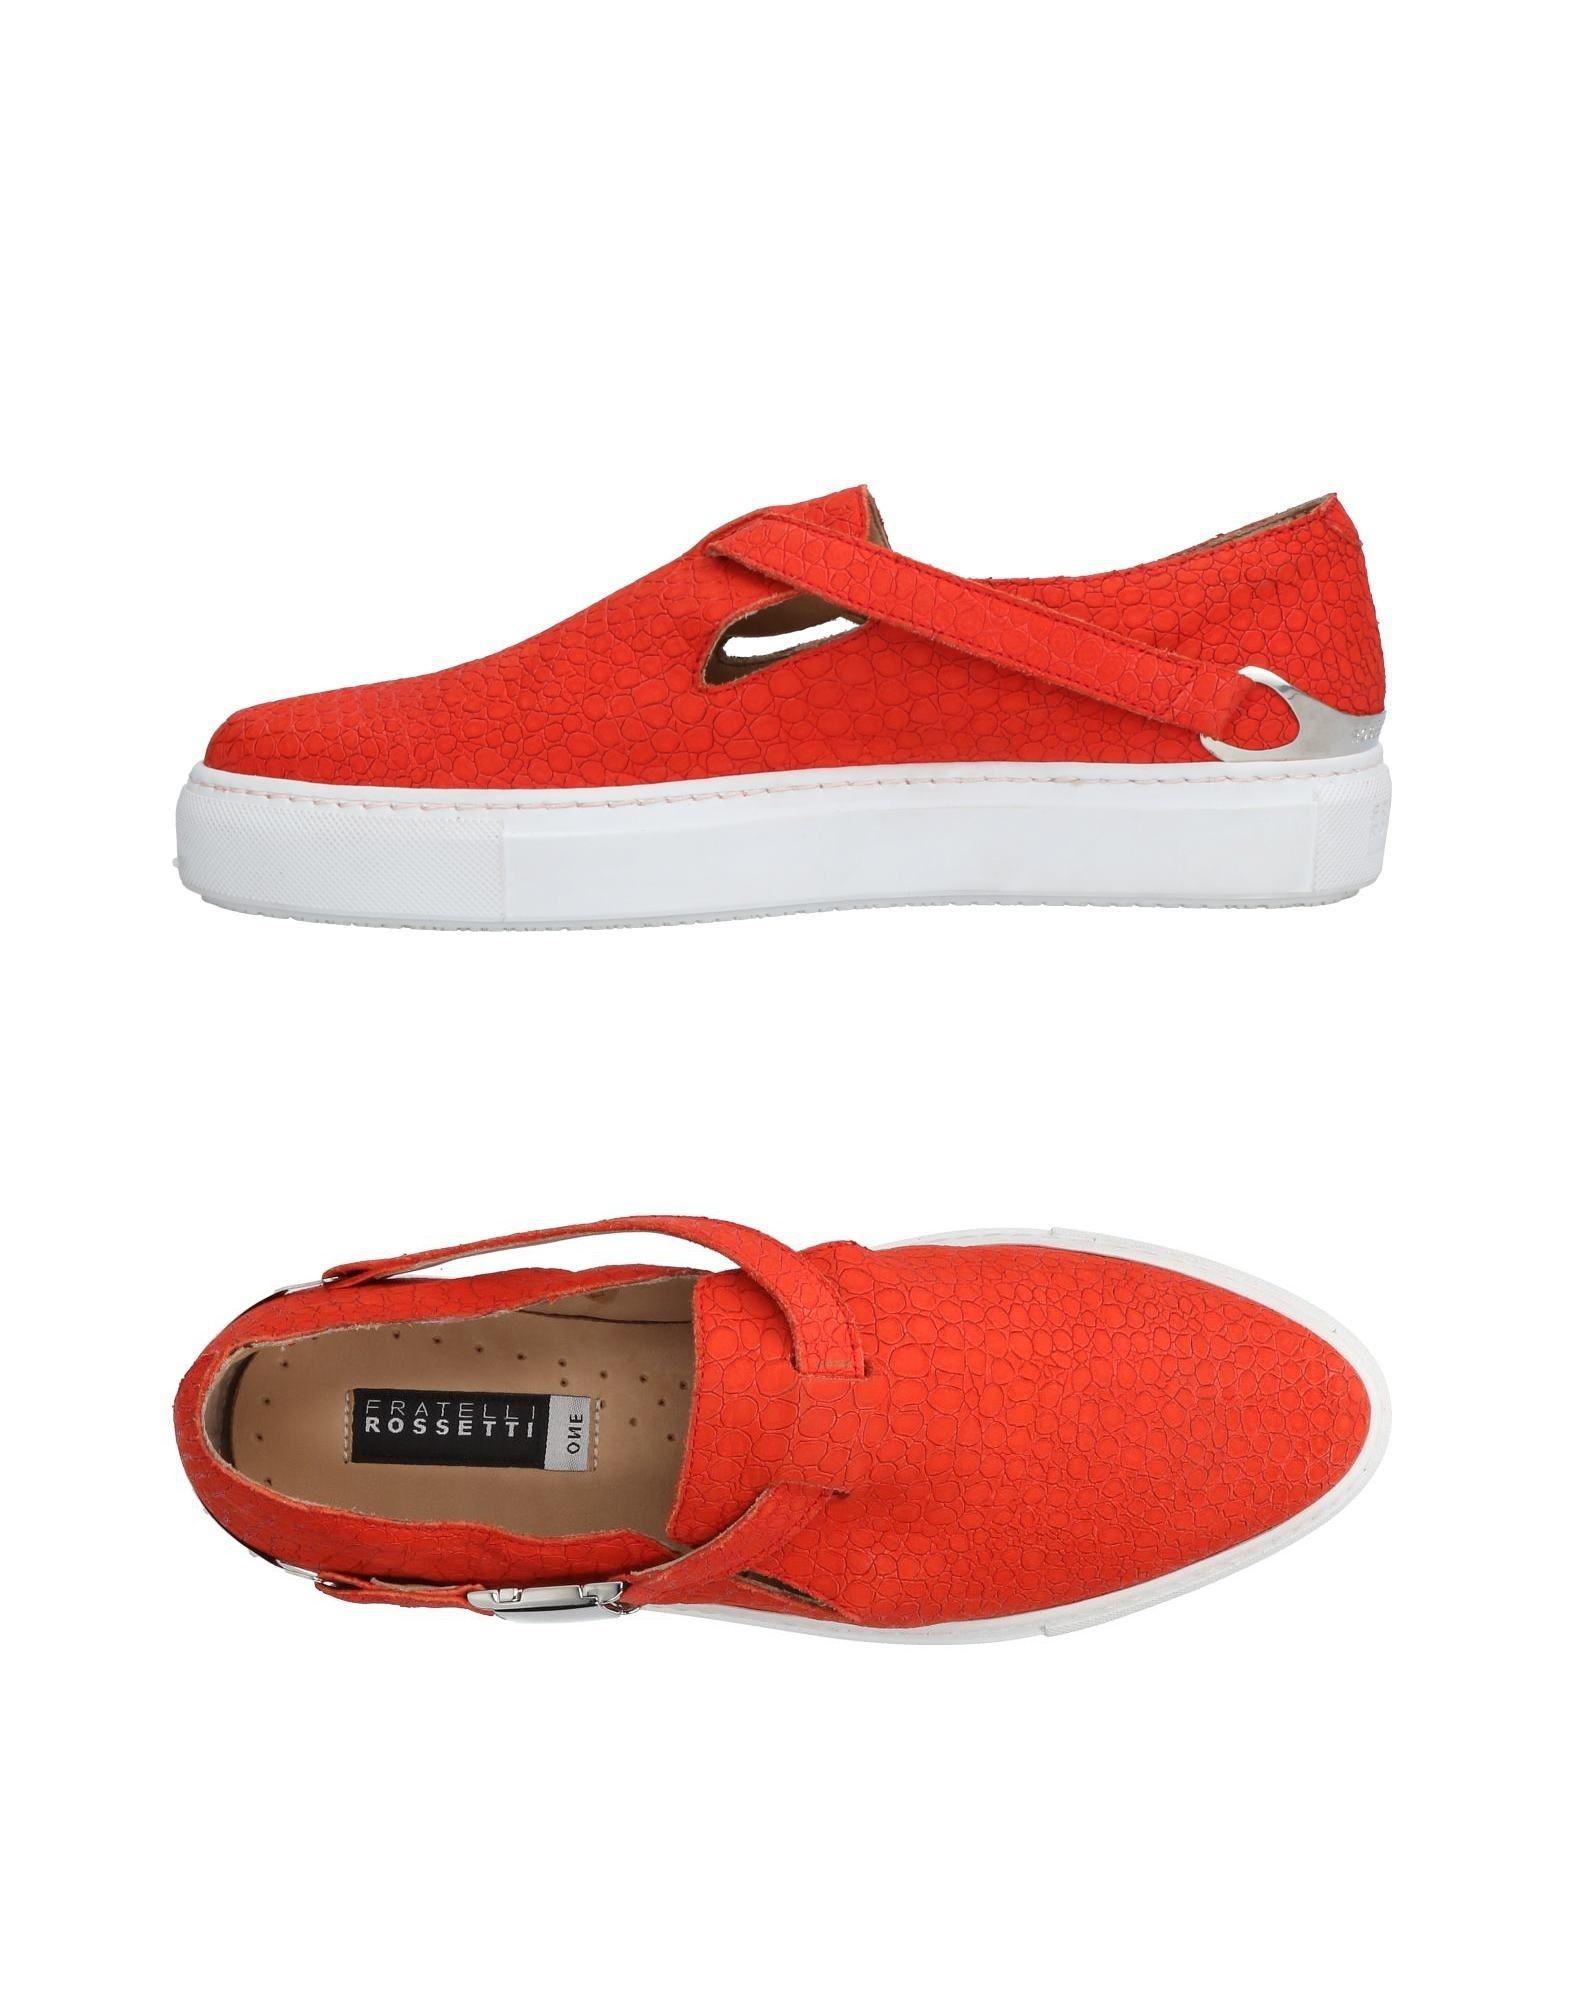 Fratelli Rossetti Leather Low-tops & Sneakers in Red - Lyst